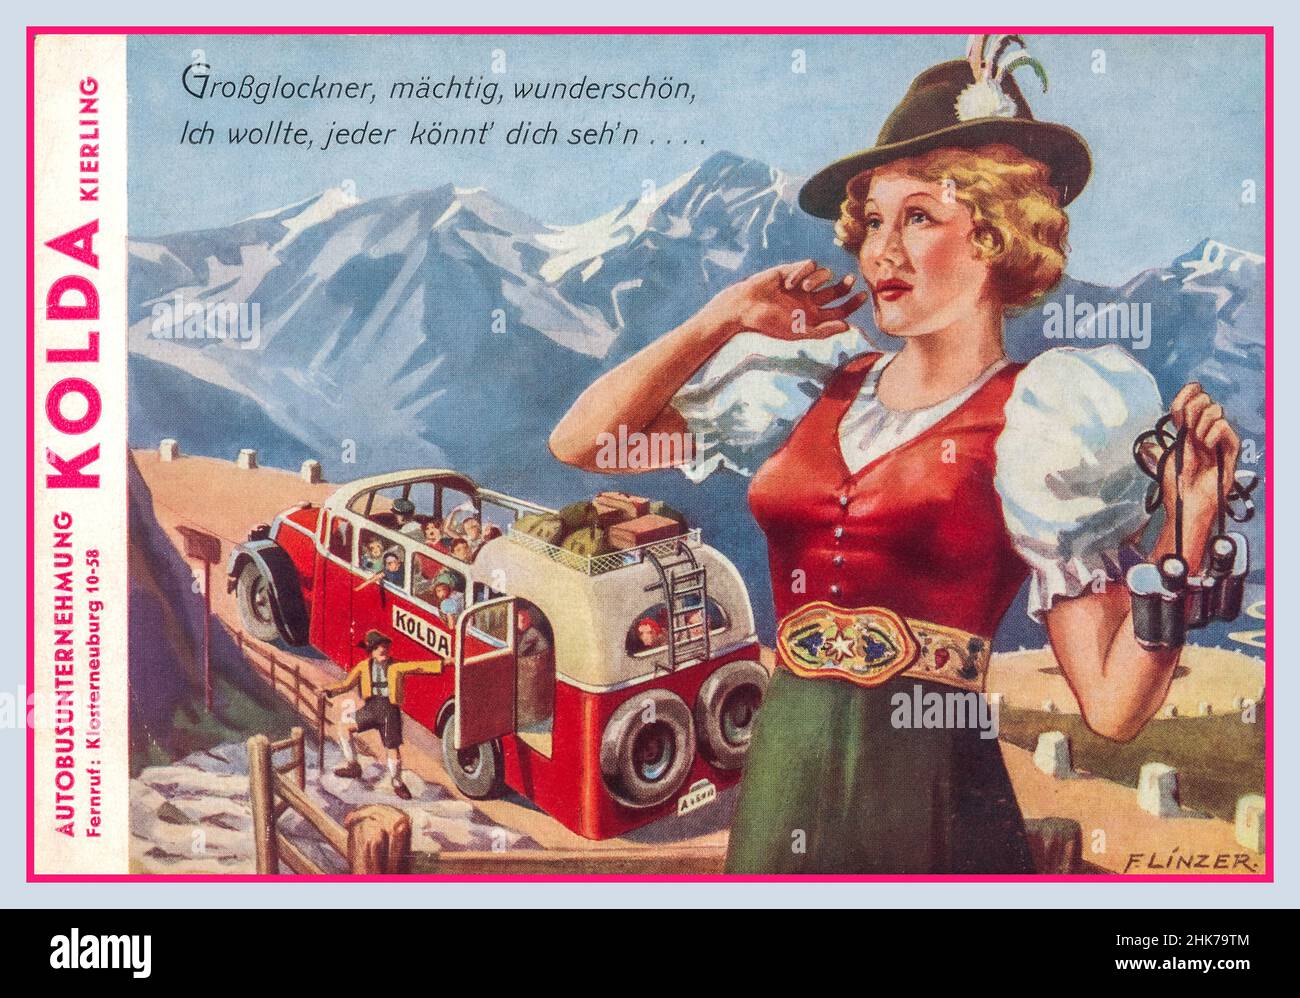 1920s Austrian 'Kolda' travel bus advertising card for the Austrian Tyrol Alps with typical traditional national folk costume Austrian lady in foreground Kolda Klosterneuburg Austria Austrian Tyrol großglockner machtag wunderschön ich wollte jeder konnf dich  se’hn. “Großglockner makes a wonderful day, I wanted everyone to be able to see you” Stock Photo